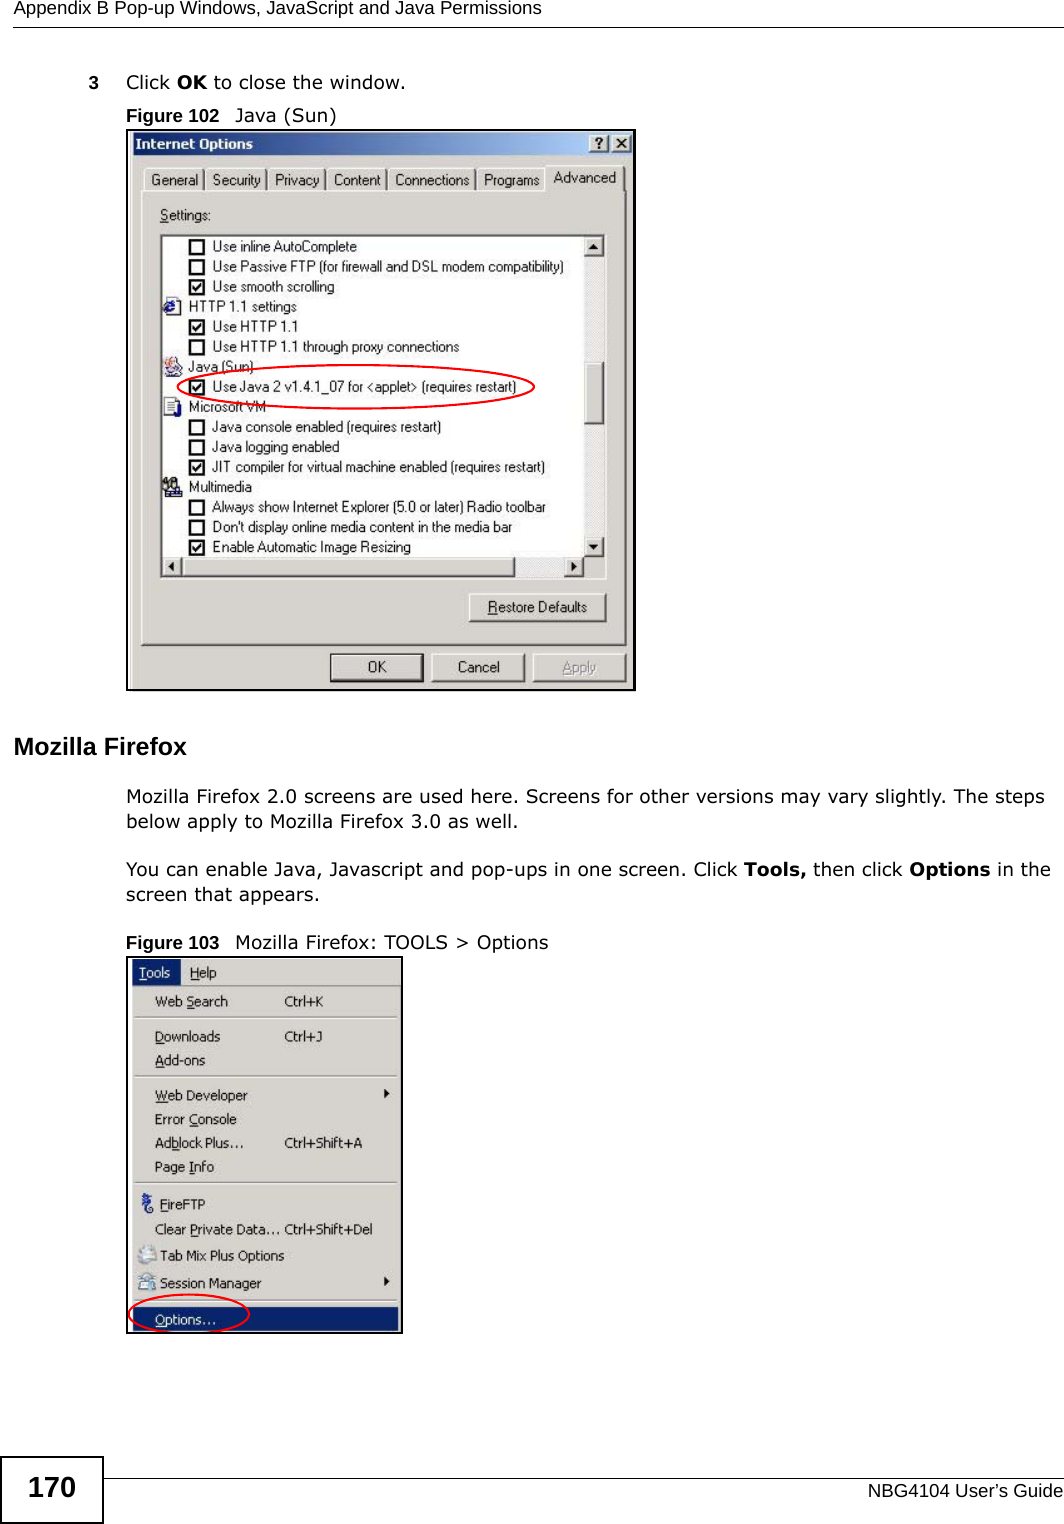 Appendix B Pop-up Windows, JavaScript and Java PermissionsNBG4104 User’s Guide1703Click OK to close the window.Figure 102   Java (Sun)Mozilla FirefoxMozilla Firefox 2.0 screens are used here. Screens for other versions may vary slightly. The steps below apply to Mozilla Firefox 3.0 as well.You can enable Java, Javascript and pop-ups in one screen. Click Tools, then click Options in the screen that appears.Figure 103   Mozilla Firefox: TOOLS &gt; Options